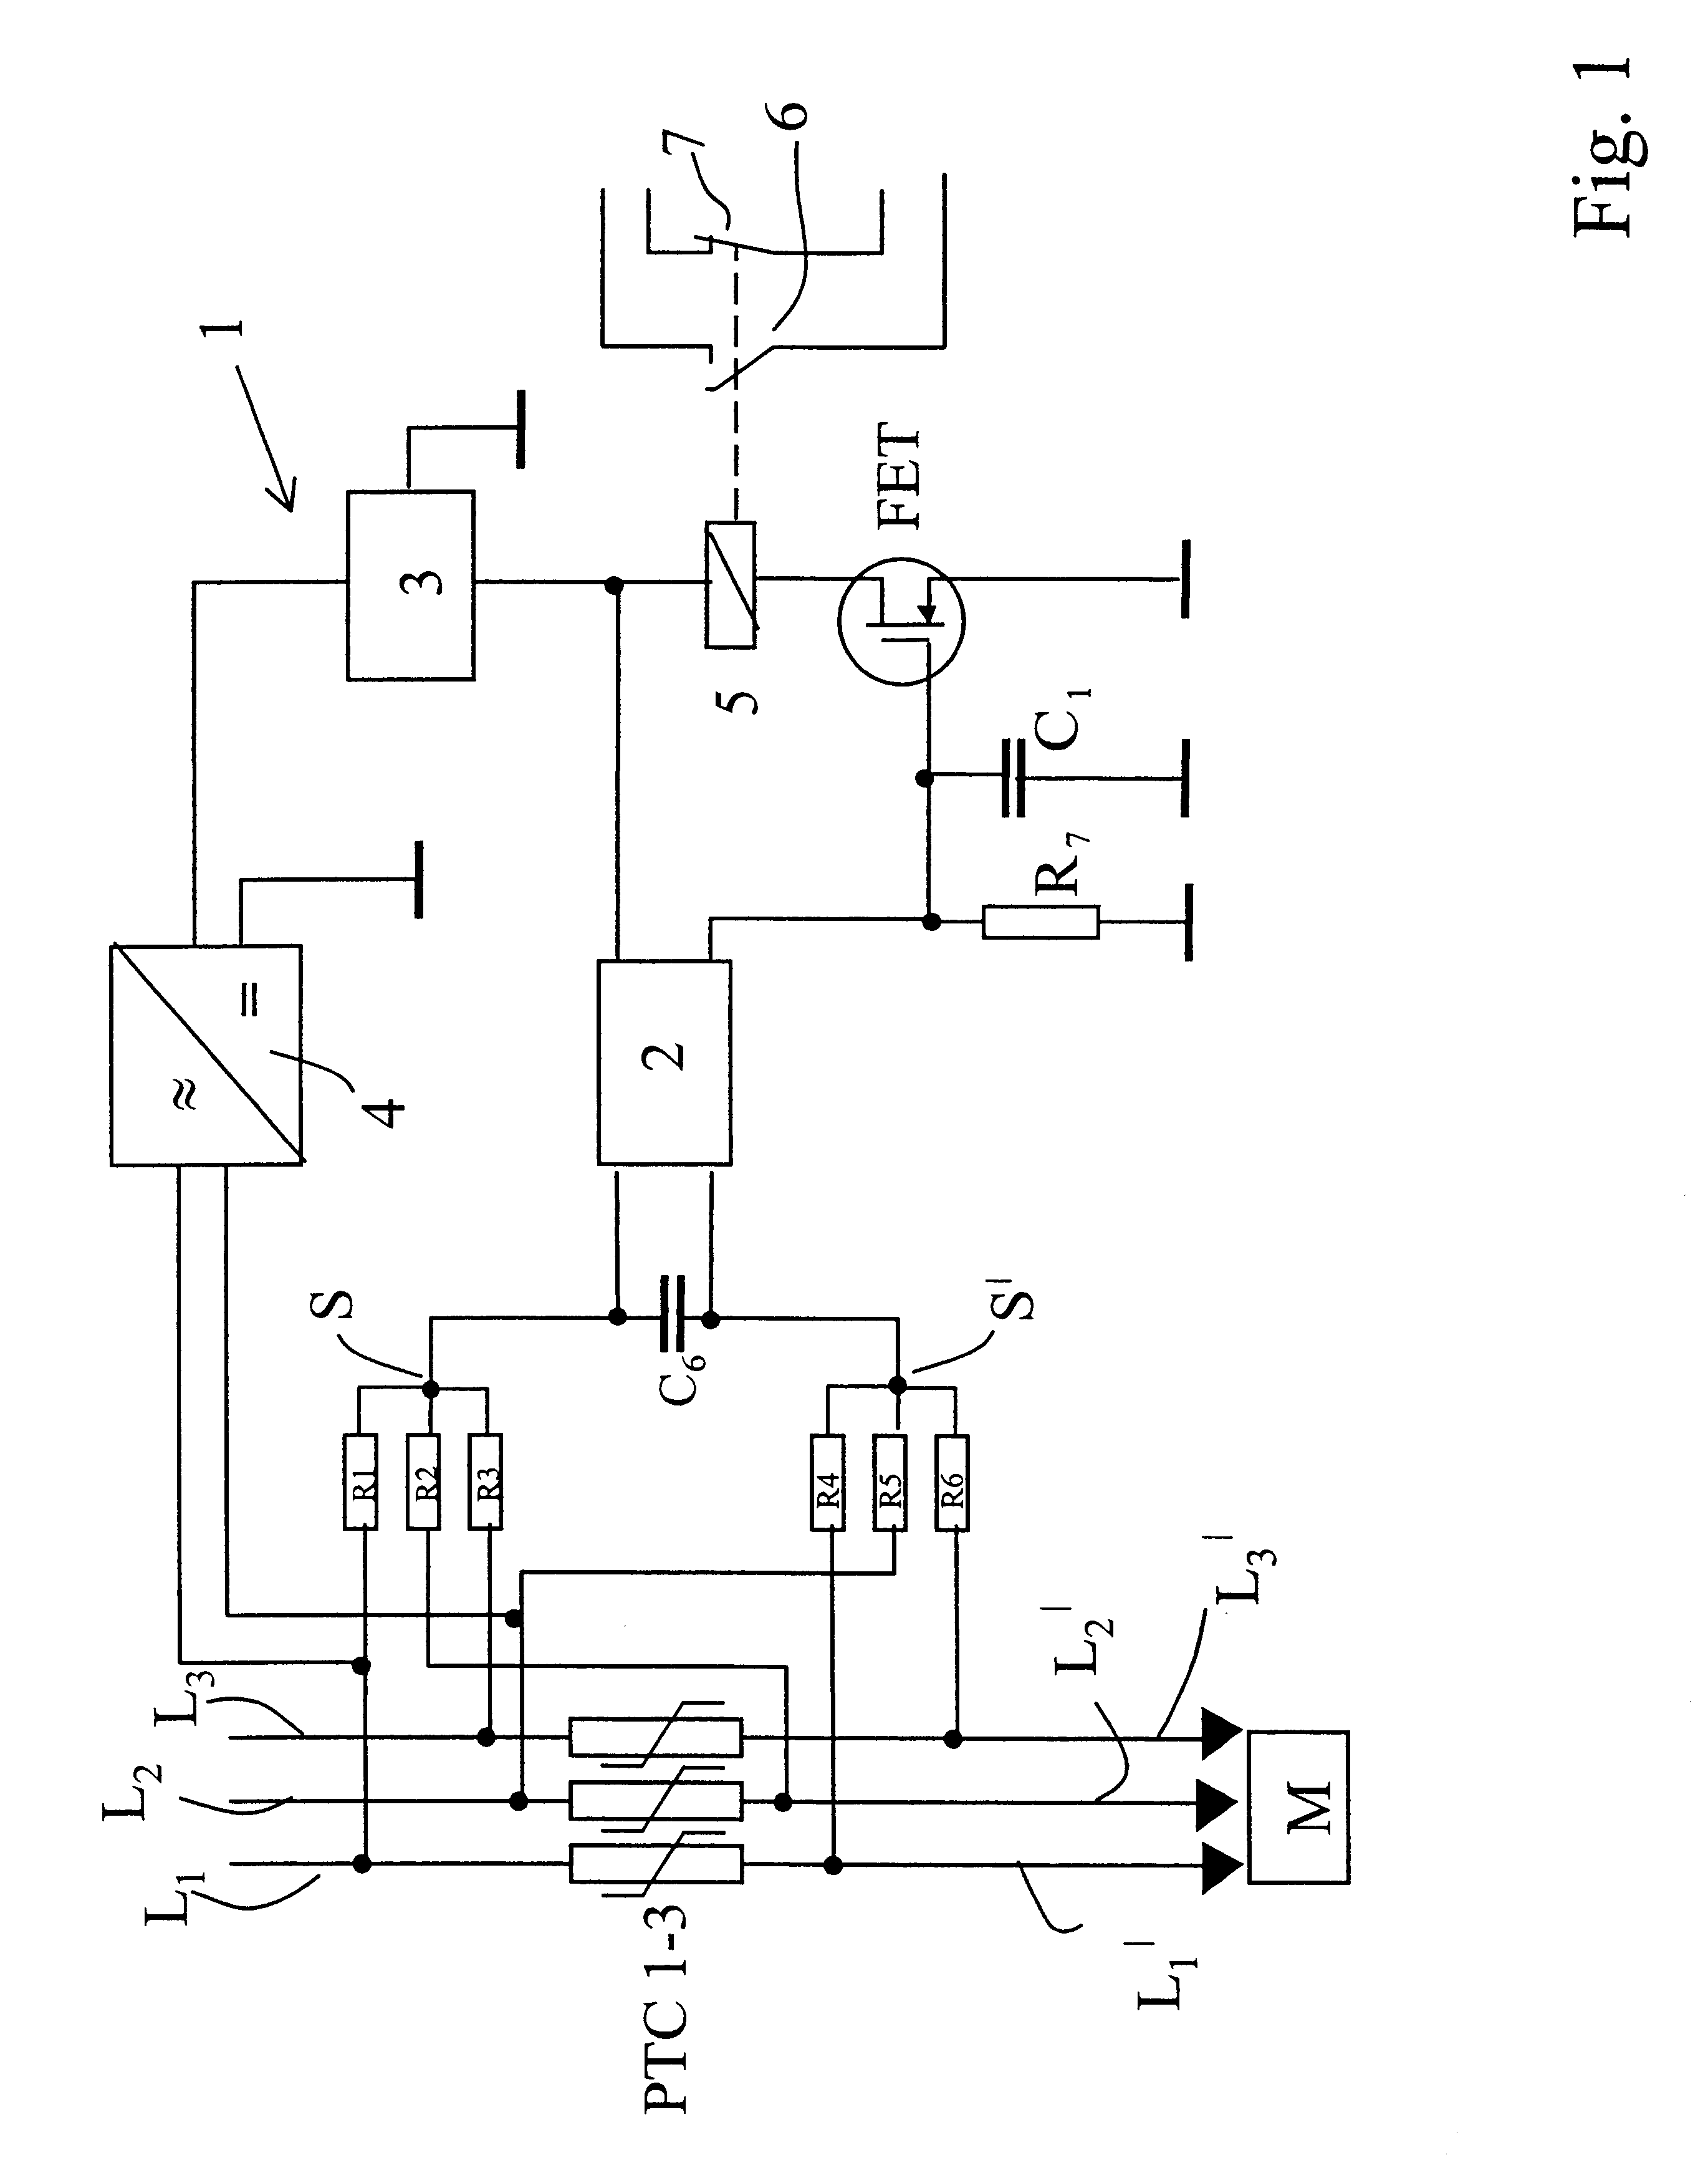 Monitor circuit for a current limiting device